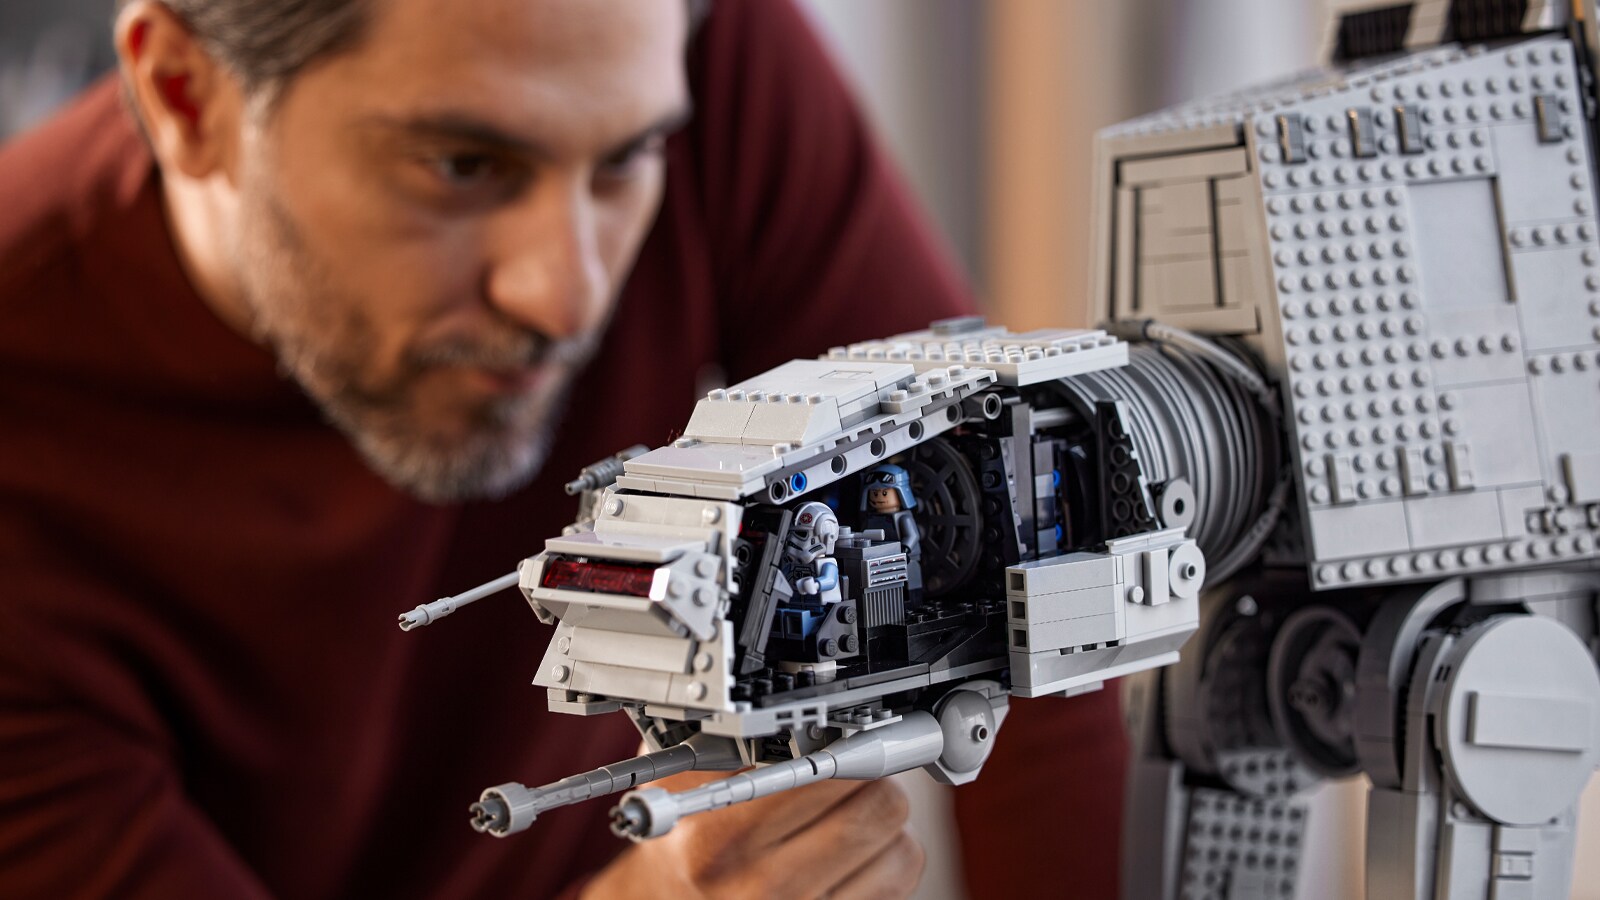 Best Legos for any age: From Star Wars to ISS